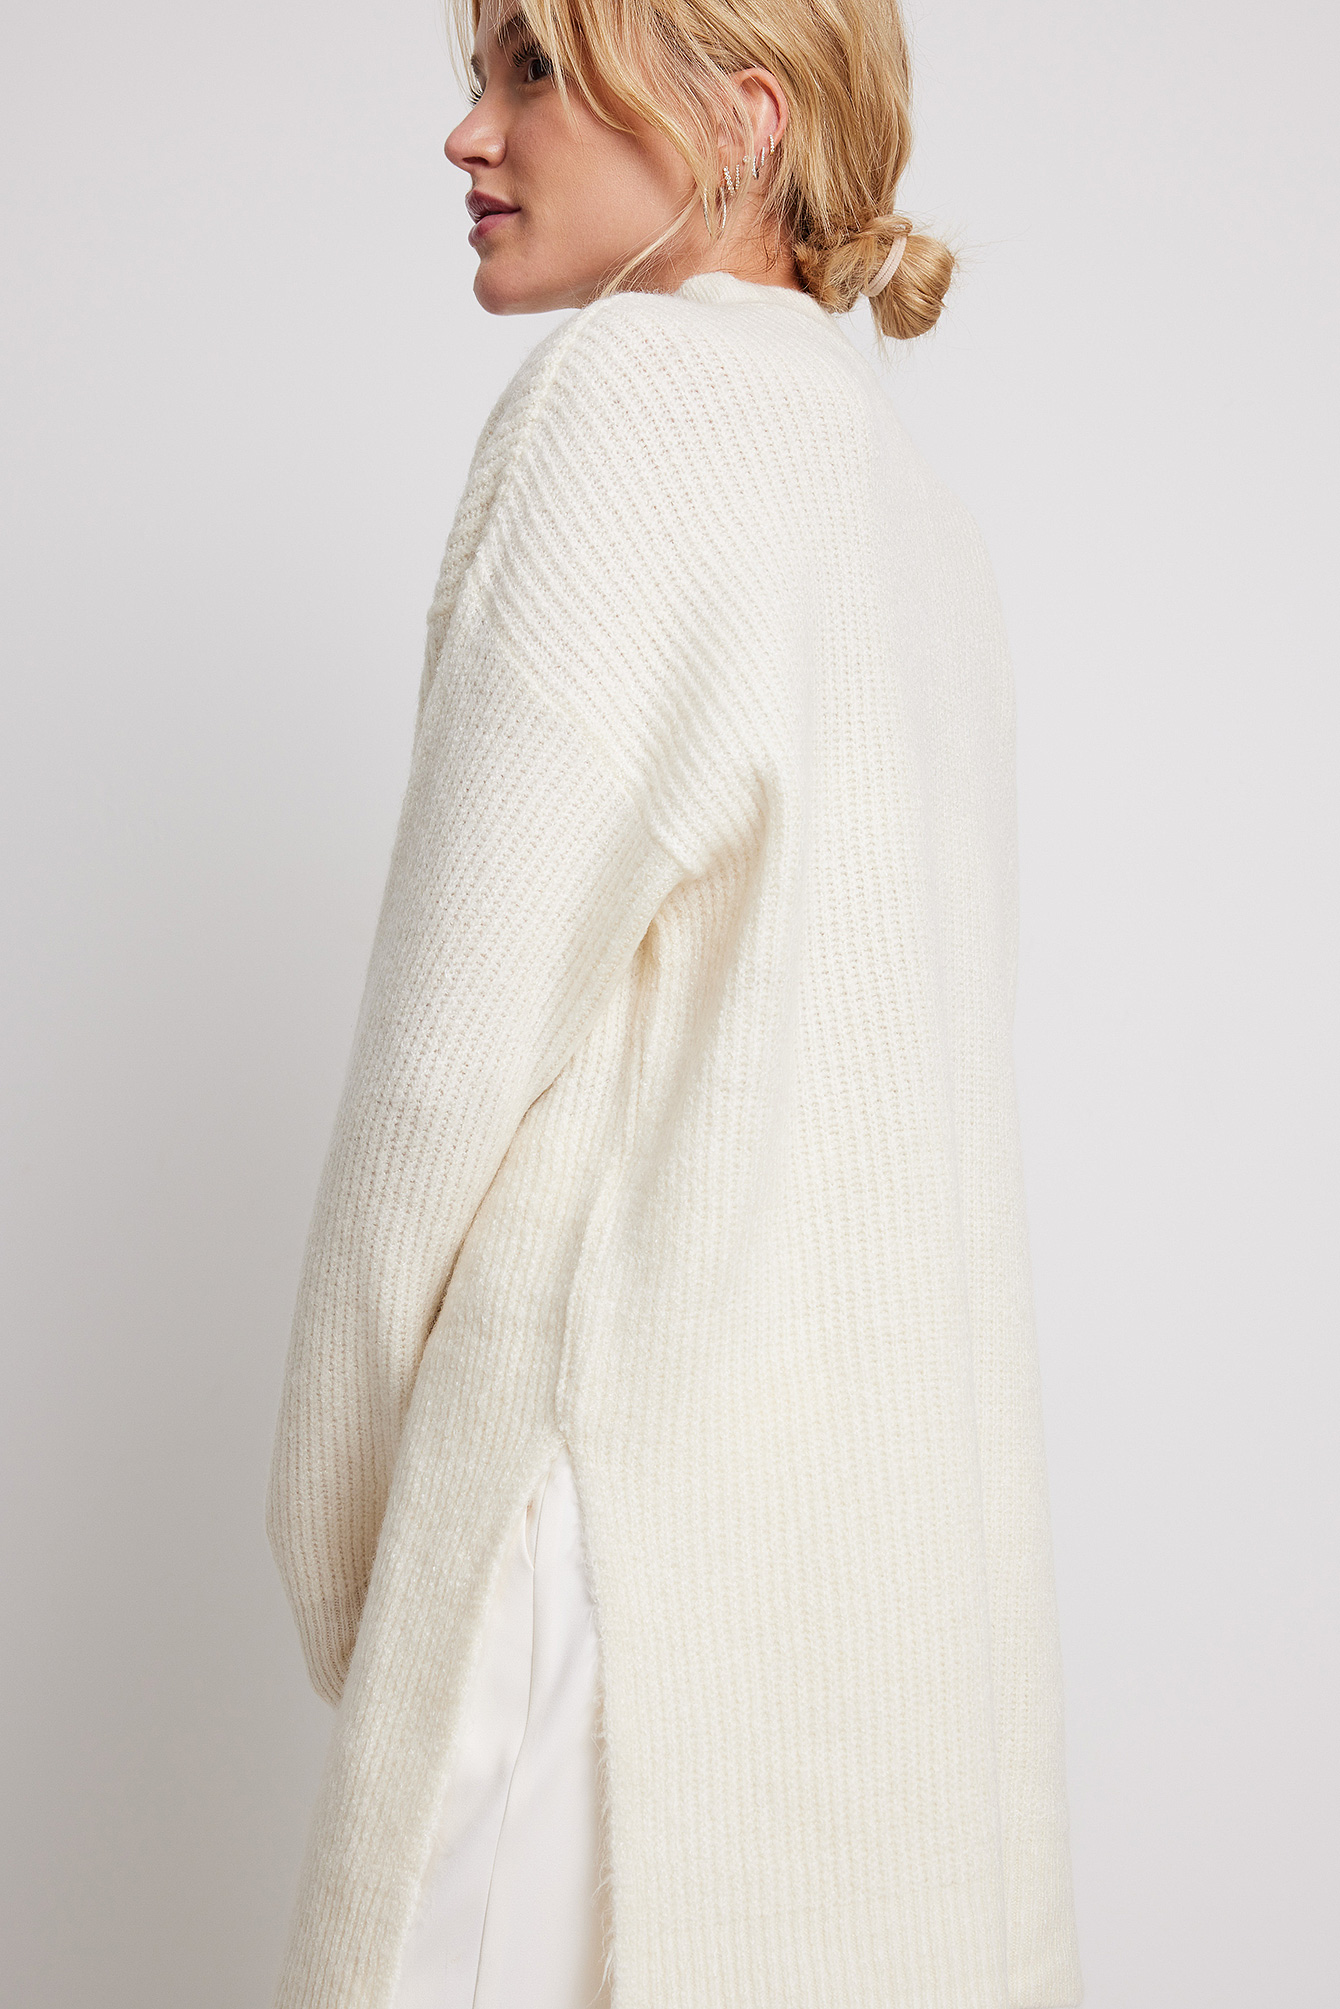 Offwhite Oversized Knitted Sweater